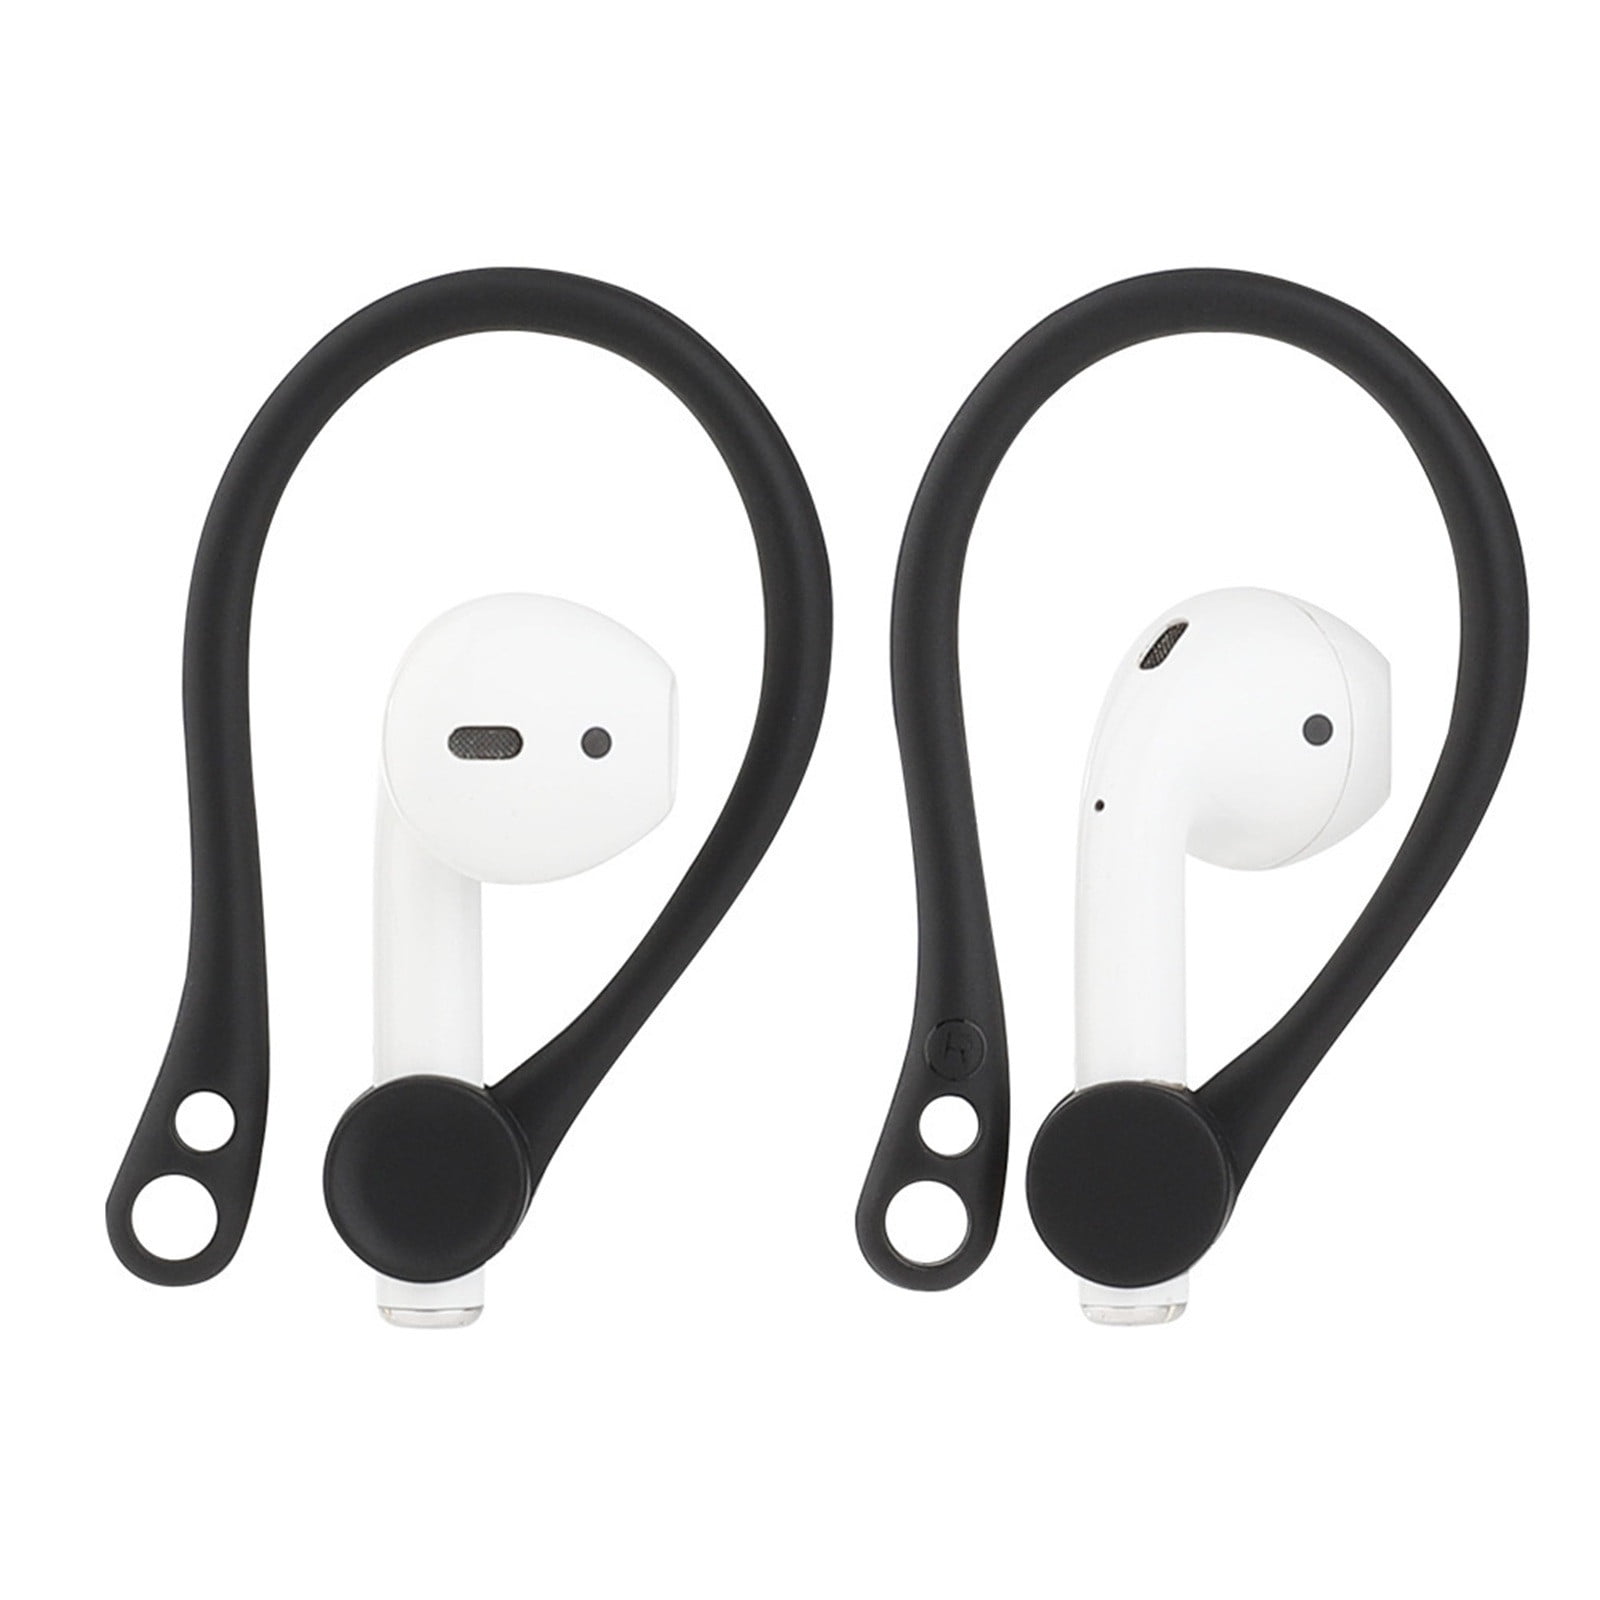 Clearance Accessories Supplies Ear Hooks Designed For Apple Airpods 1 2 3 Pro Ear Hooks For Running Long-Lasting Comfort Lightweight Je5616 - Walmart.com